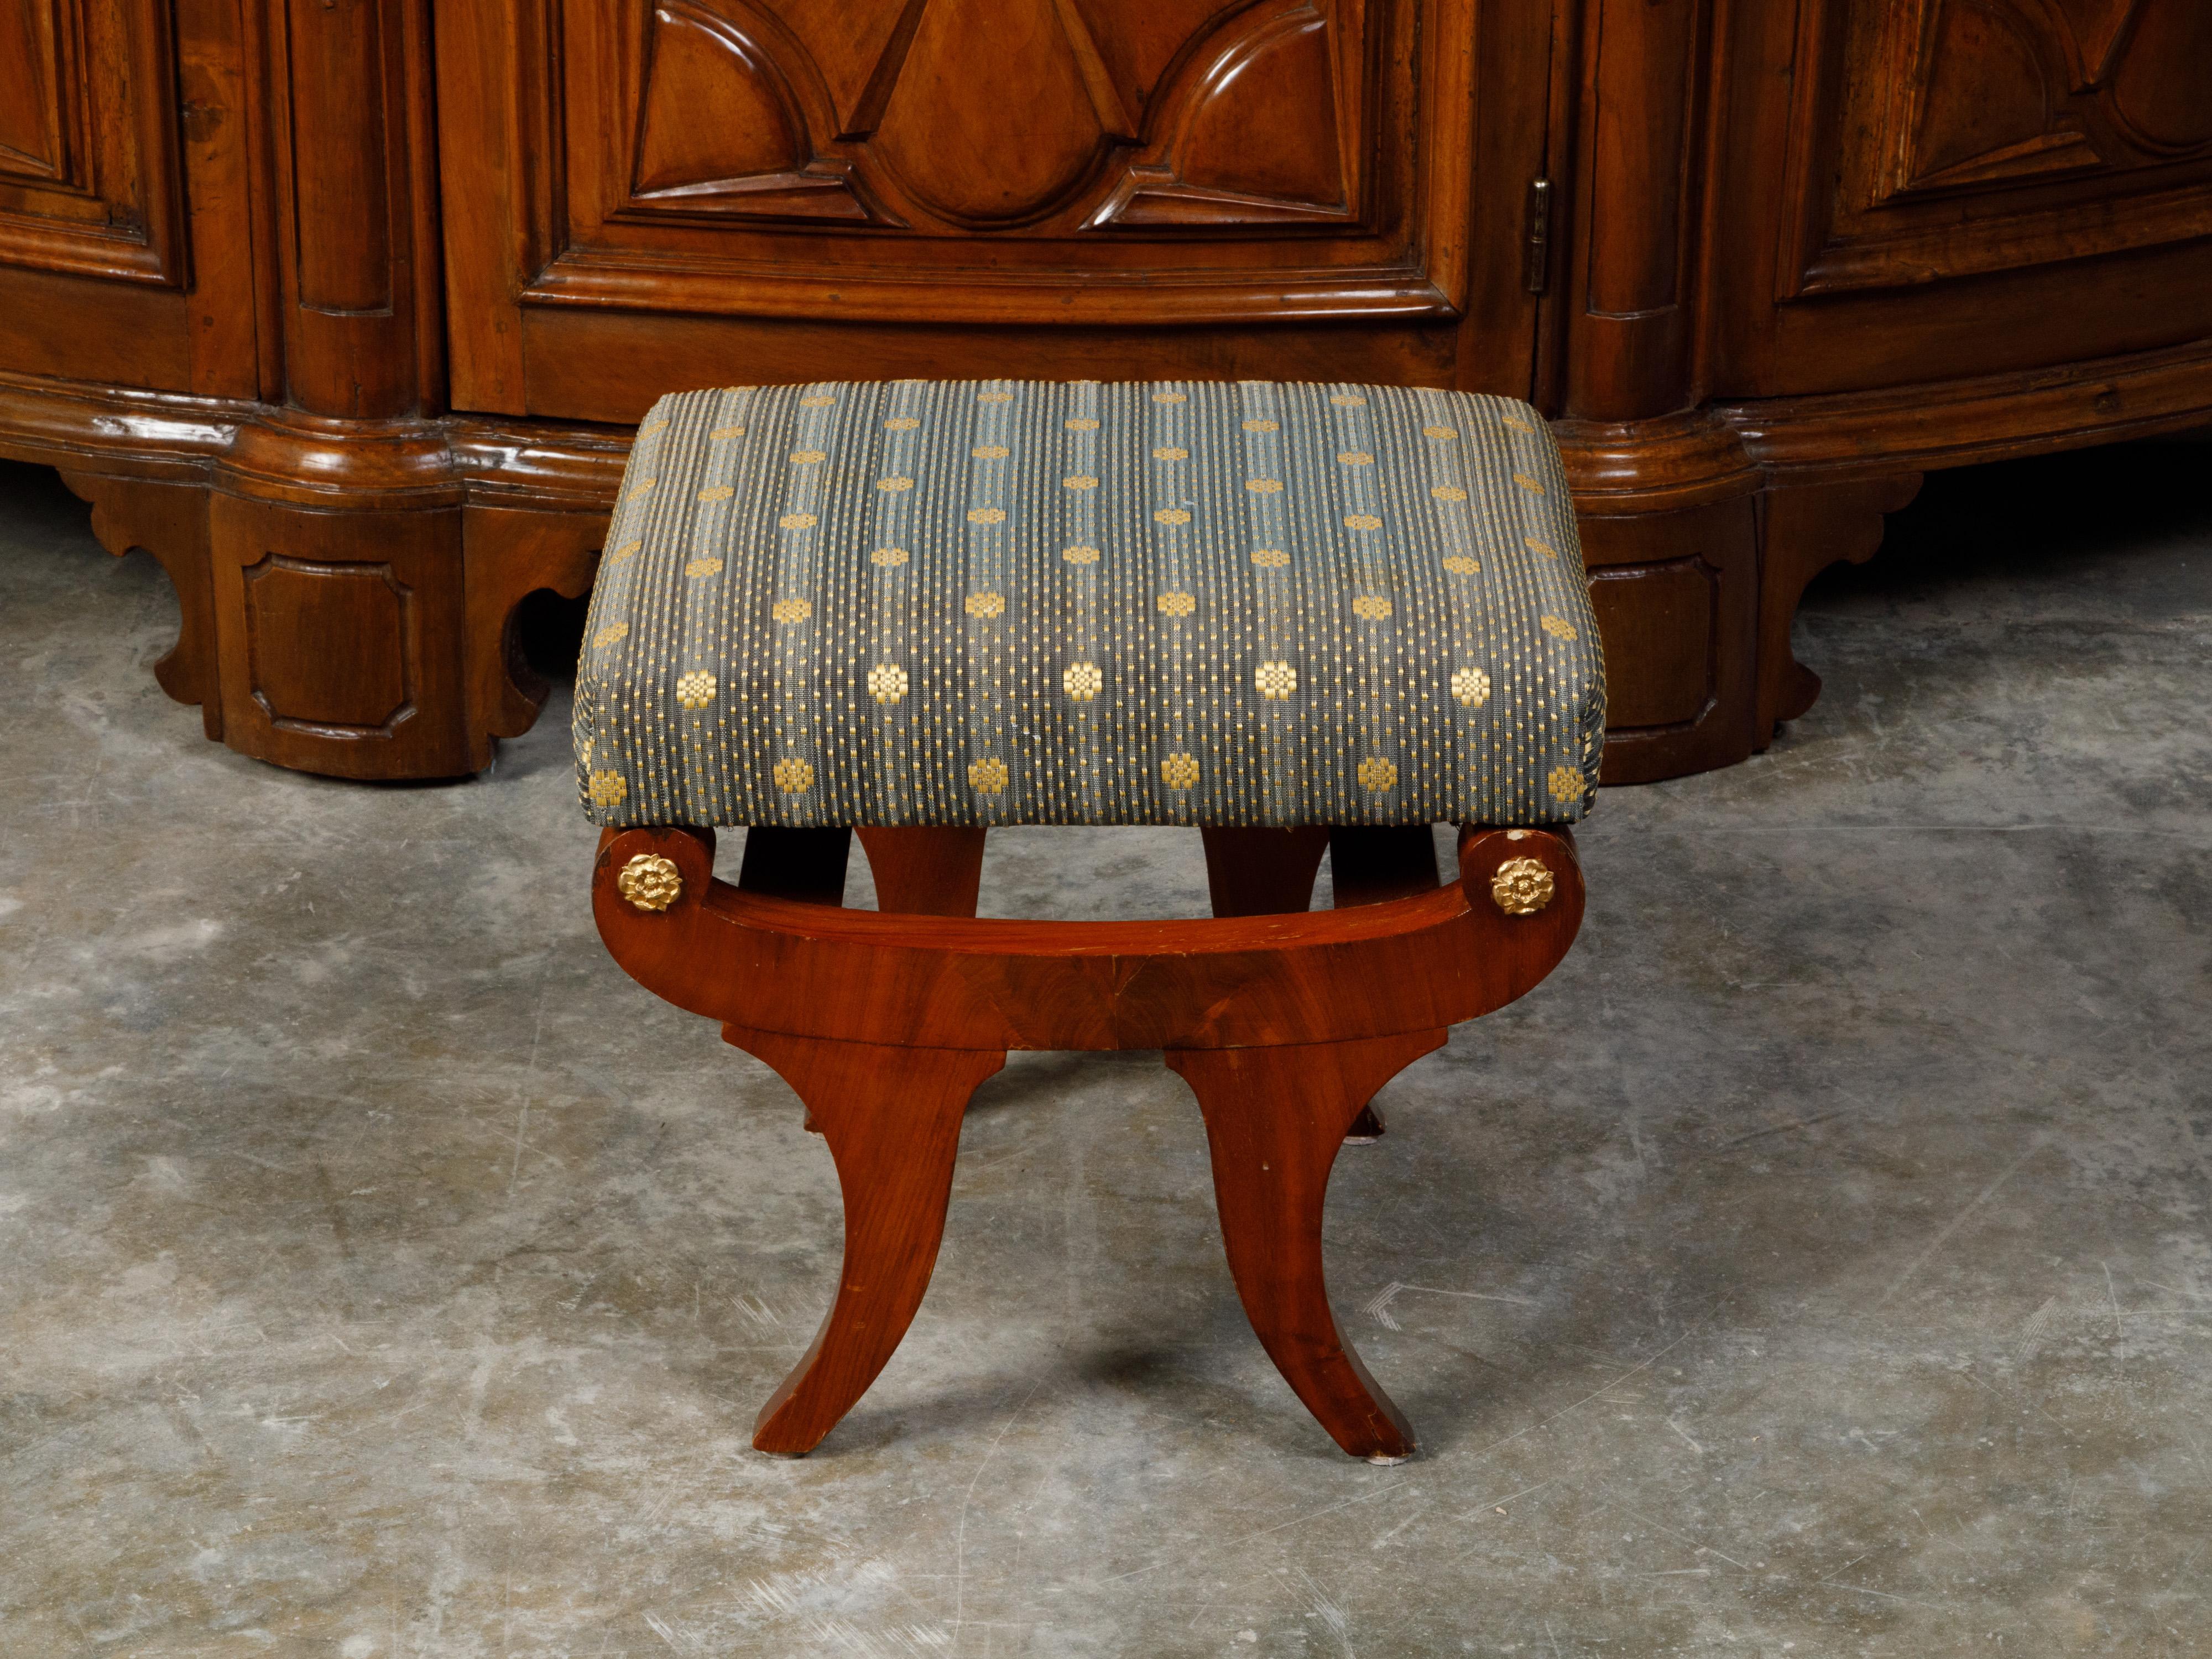 An Austrian Biedermeier period walnut stool from the 19th century, with upholstered seat and gilt rosettes. Created in Austria during the Biedermeier period, this walnut veneered stool features a rectangular upholstered seat, resting upon an elegant